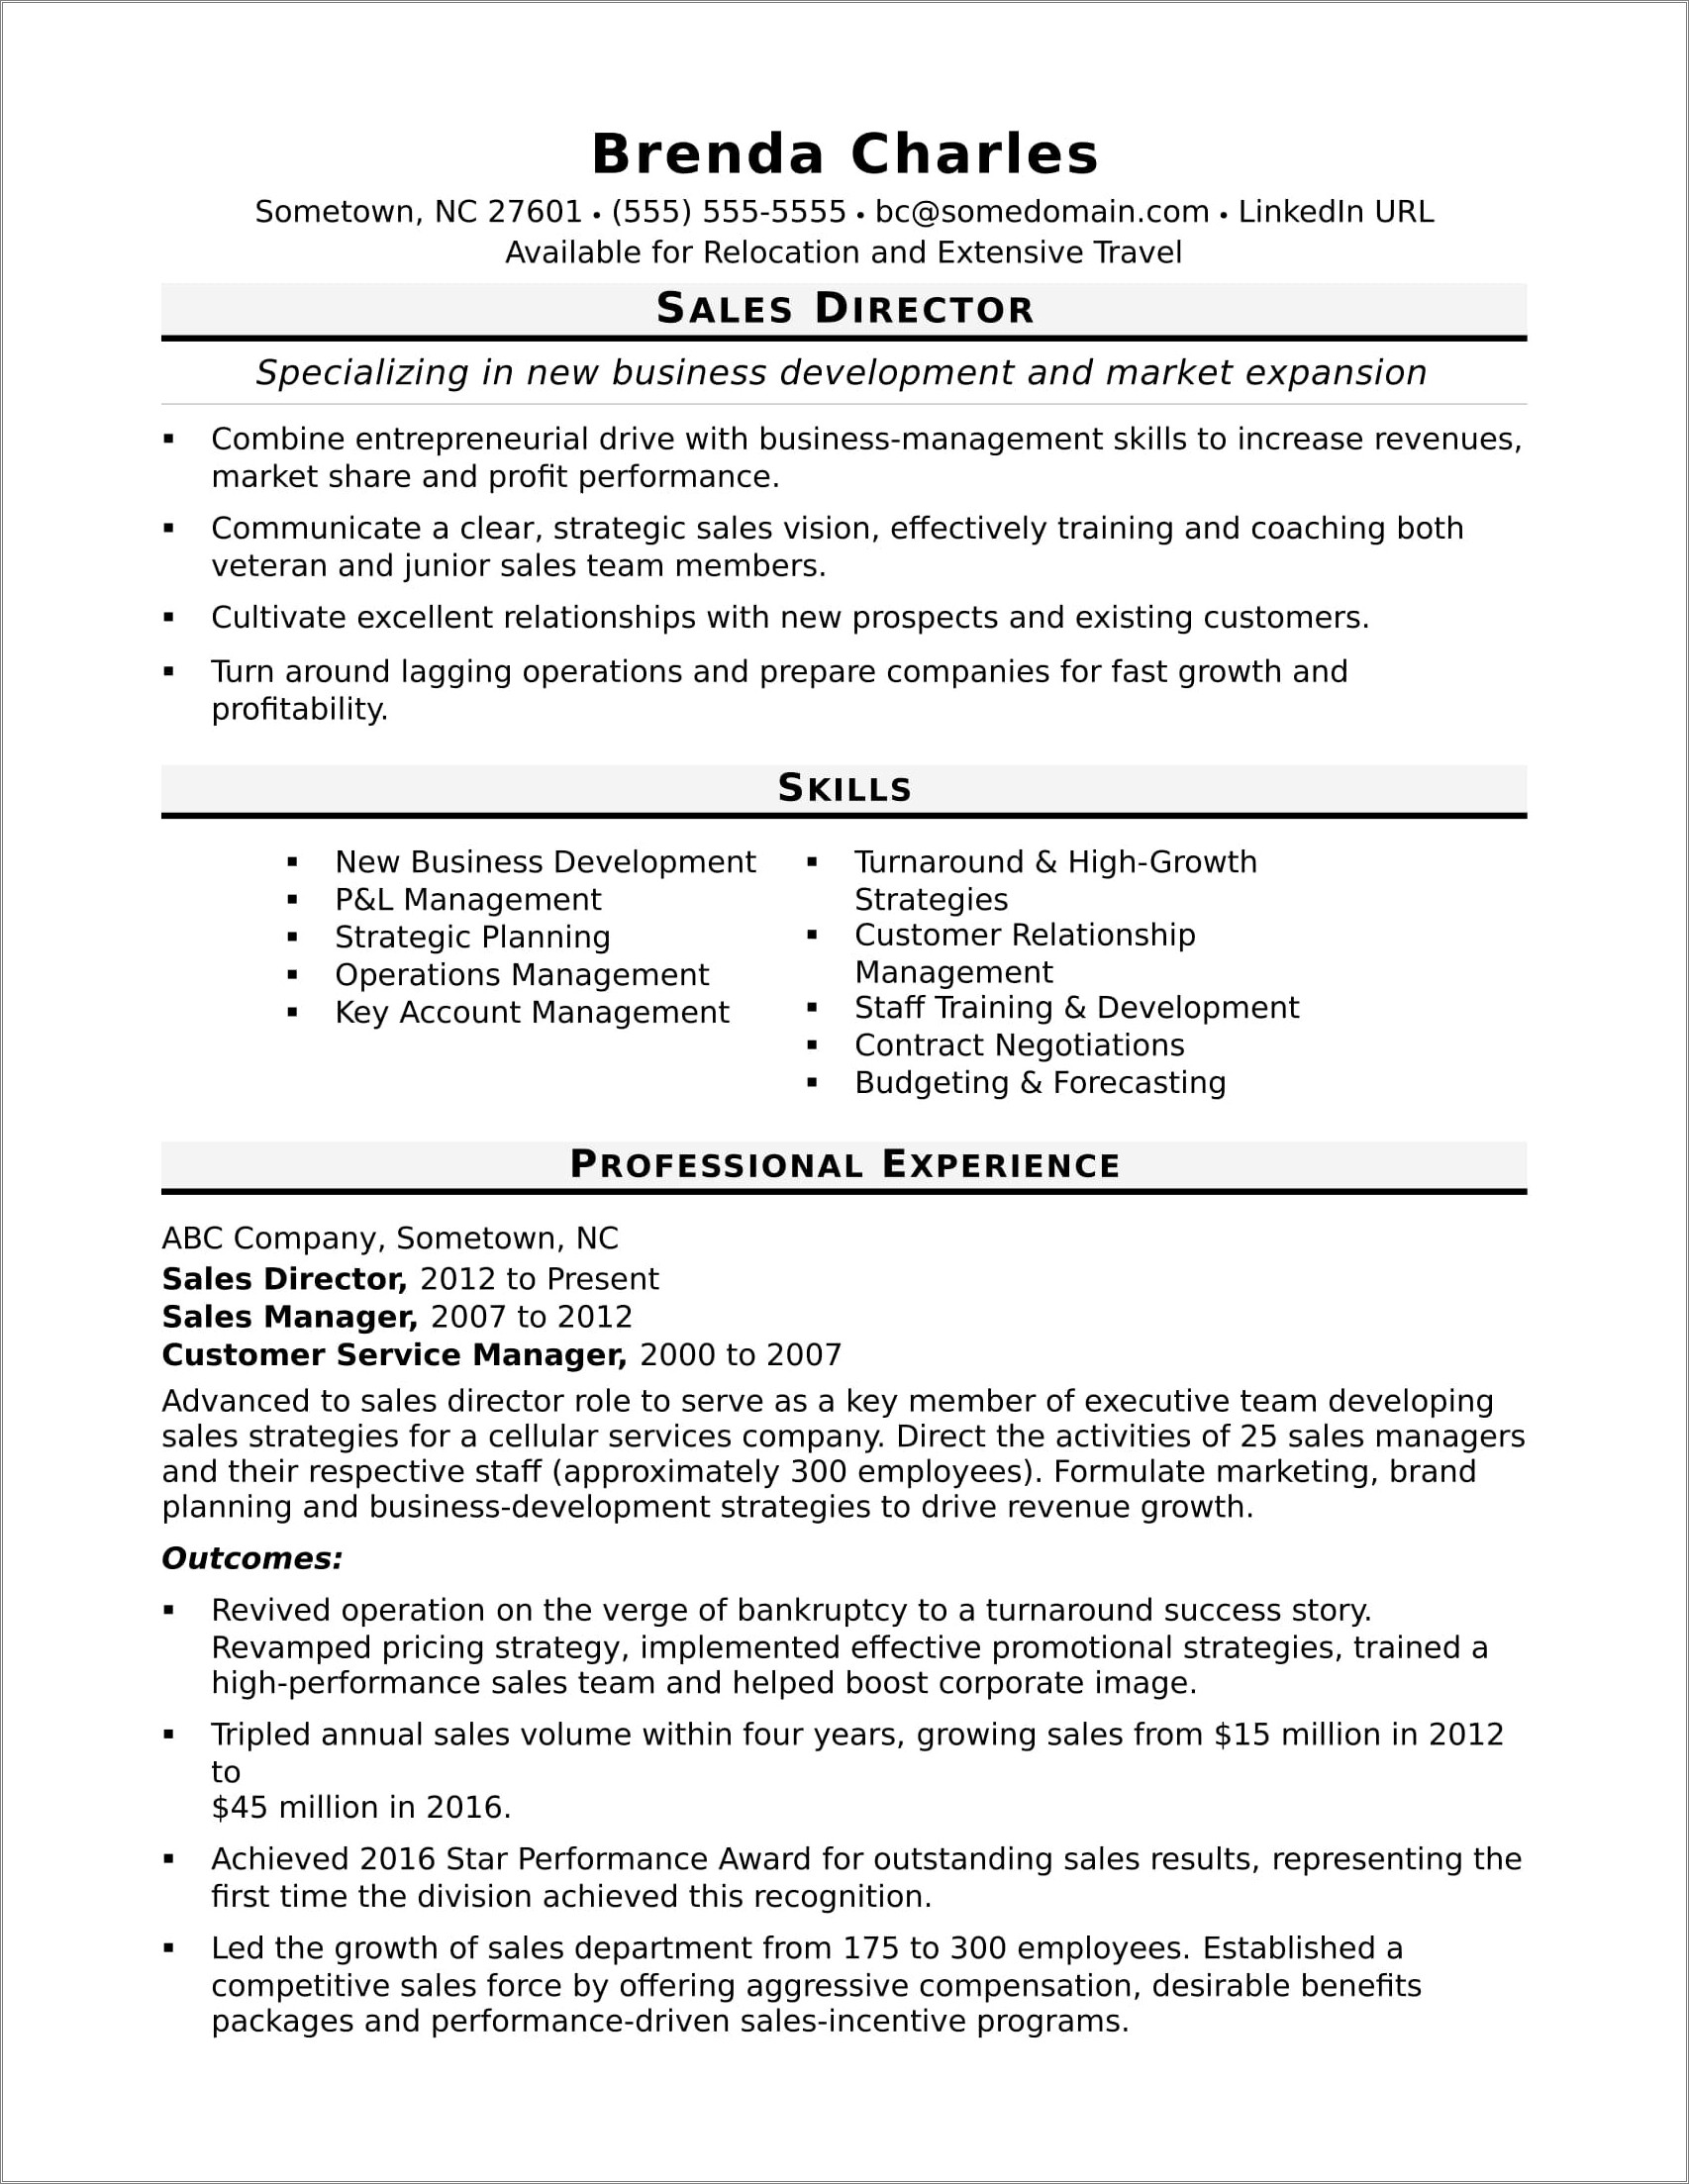 Resume Summary Statement For Marketing Manager